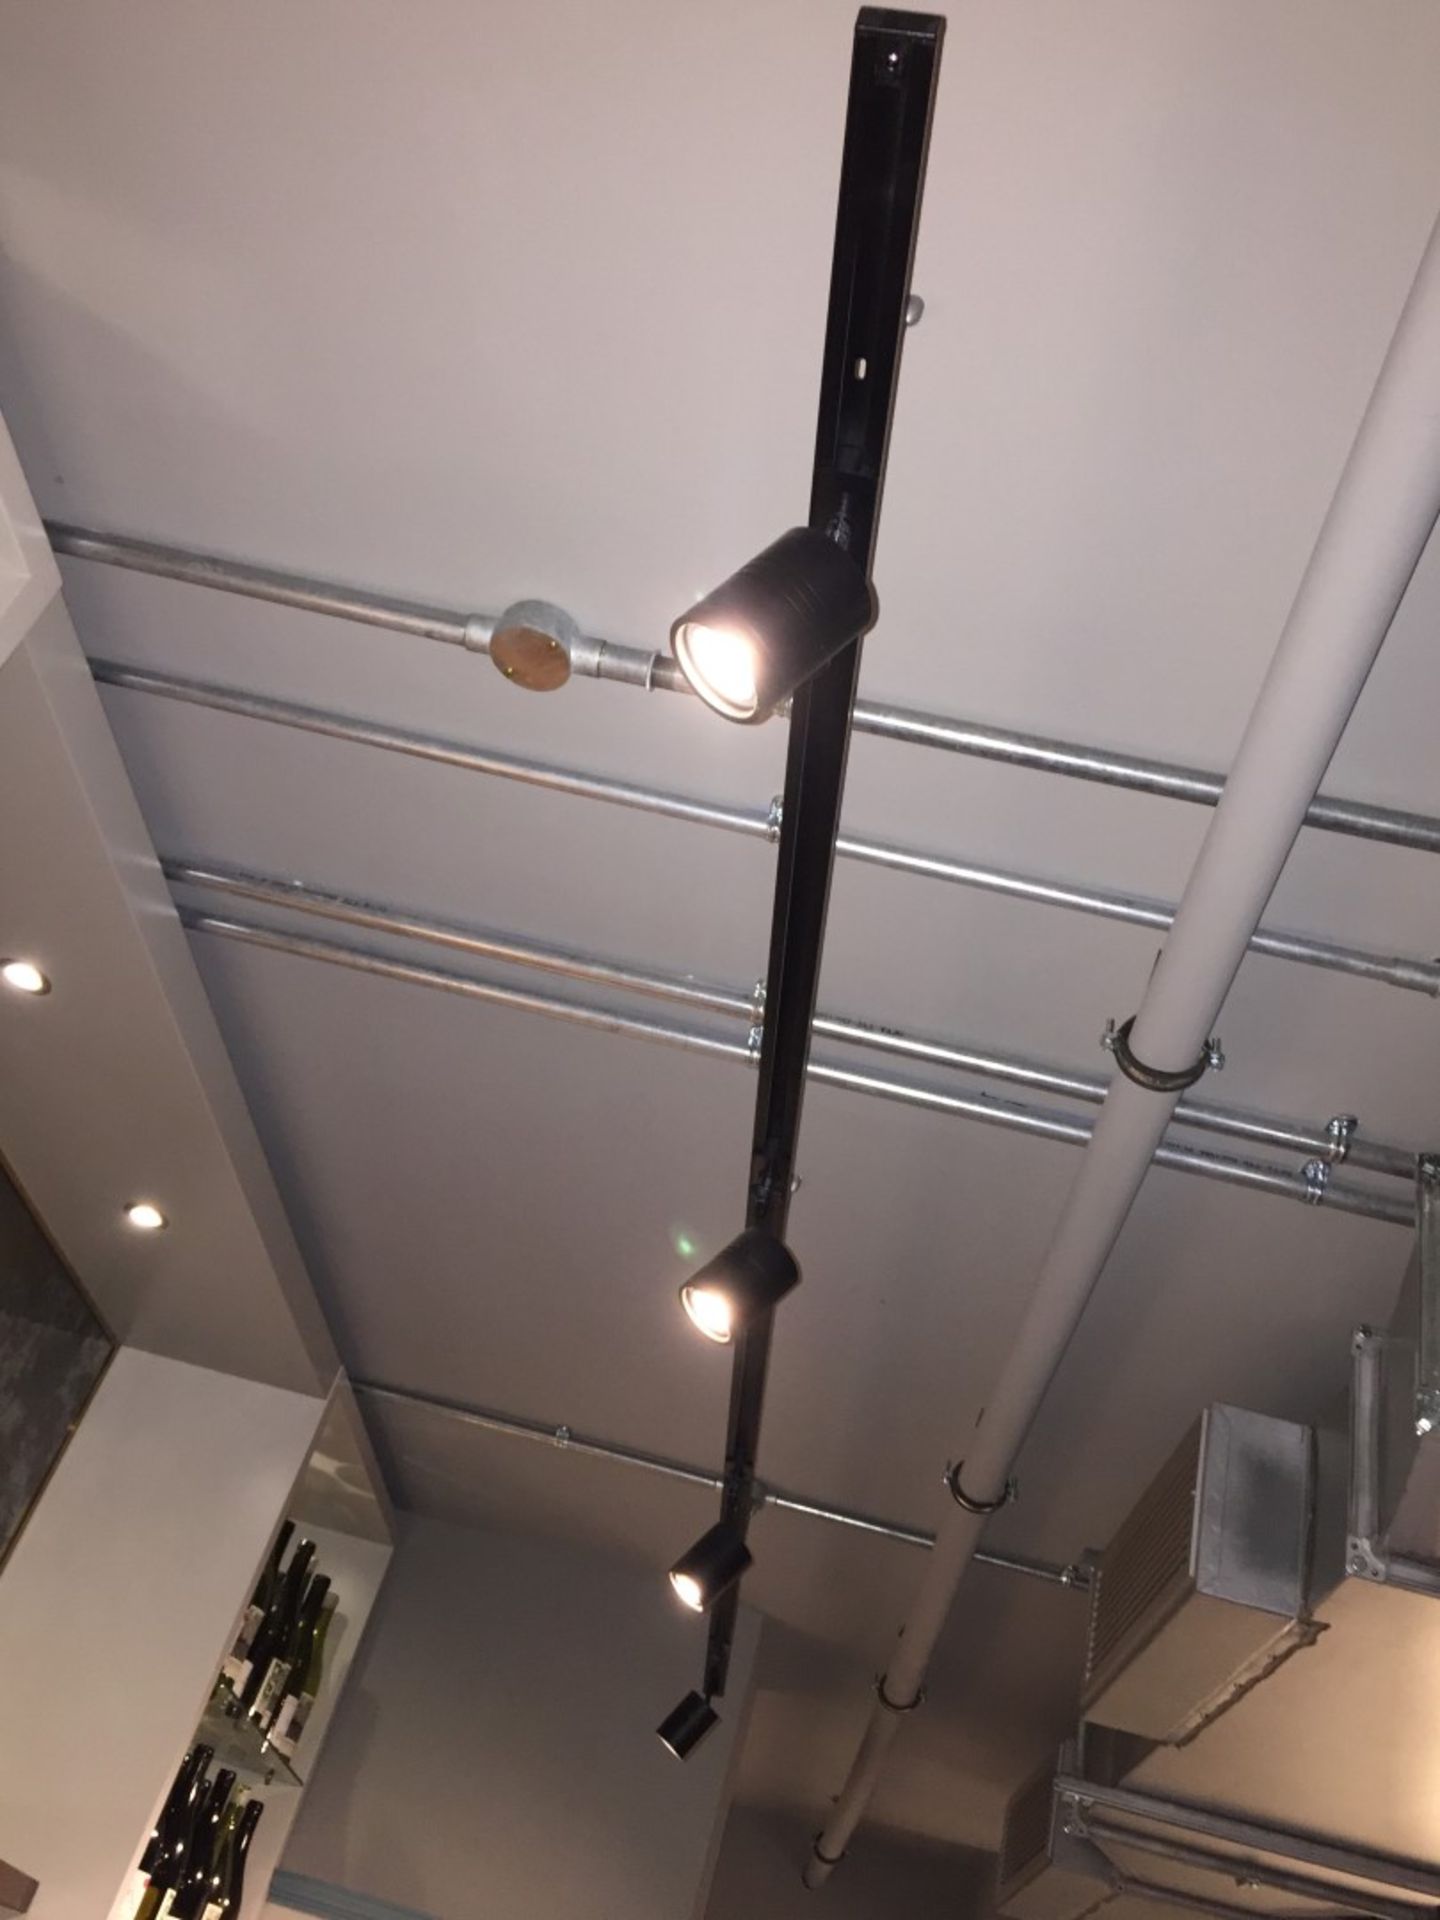 1 x Track Lighting With 4 Spot Lights - Approx 2.5 Metres In Length - Ref: WS/FF192 - Hotels, - Image 2 of 2